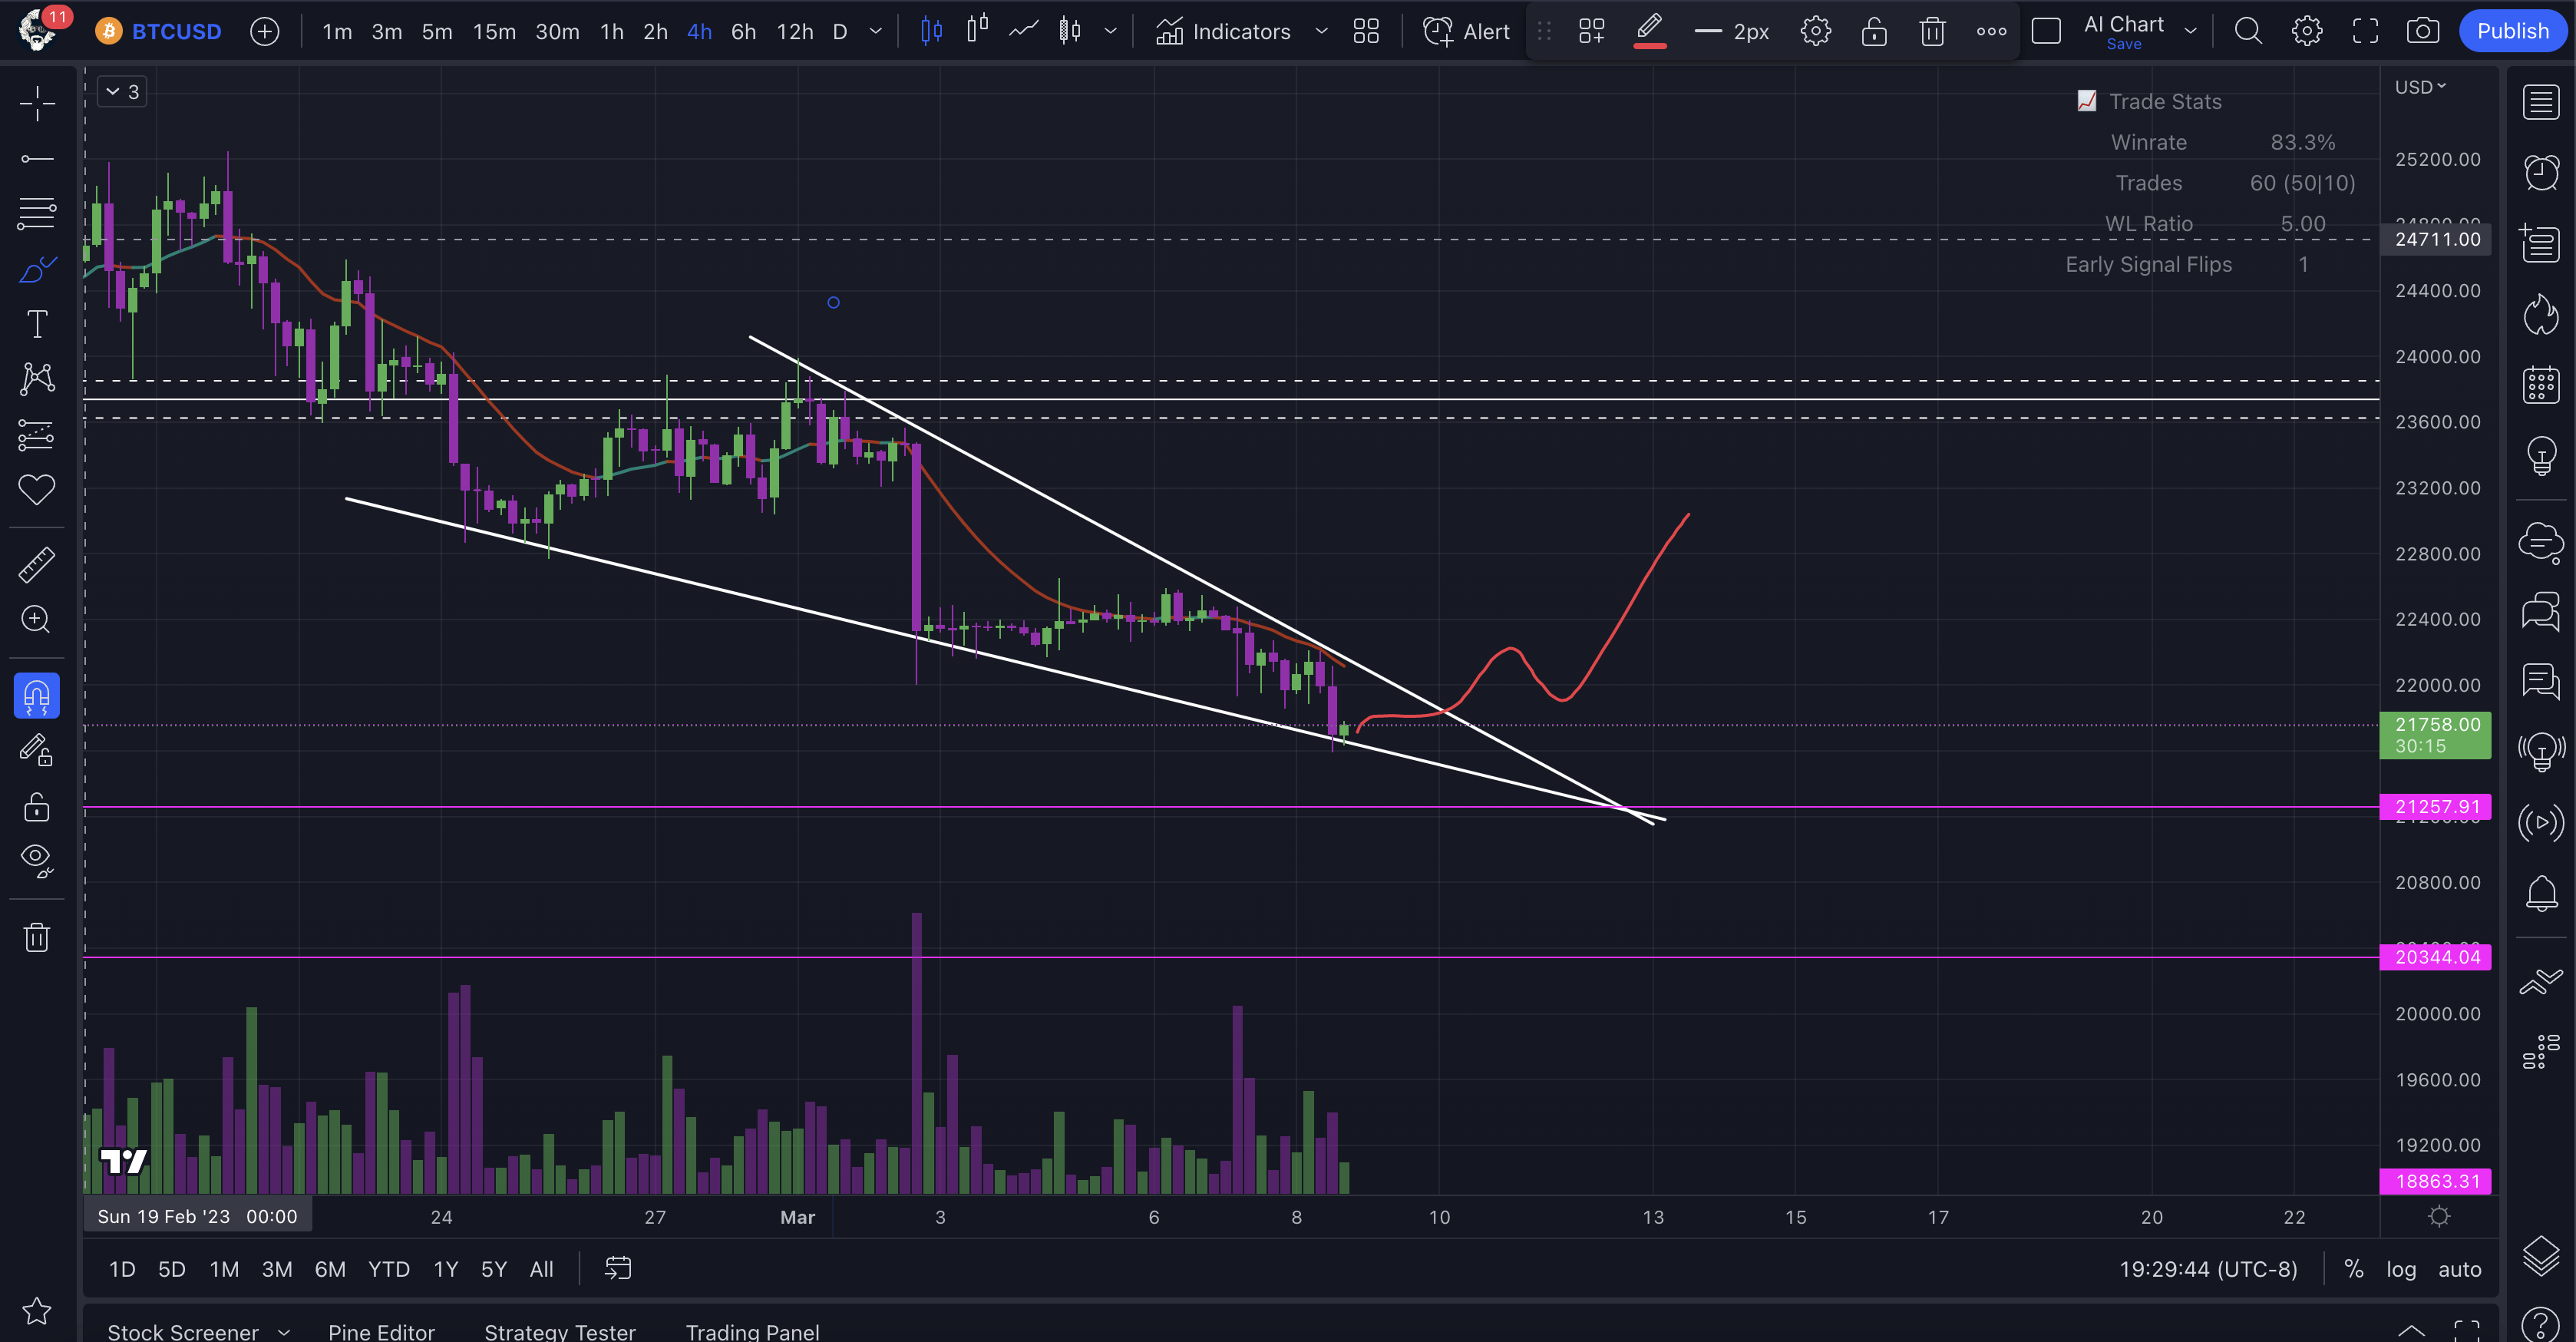 Bitcoin forming one of my favorite bullish patterns